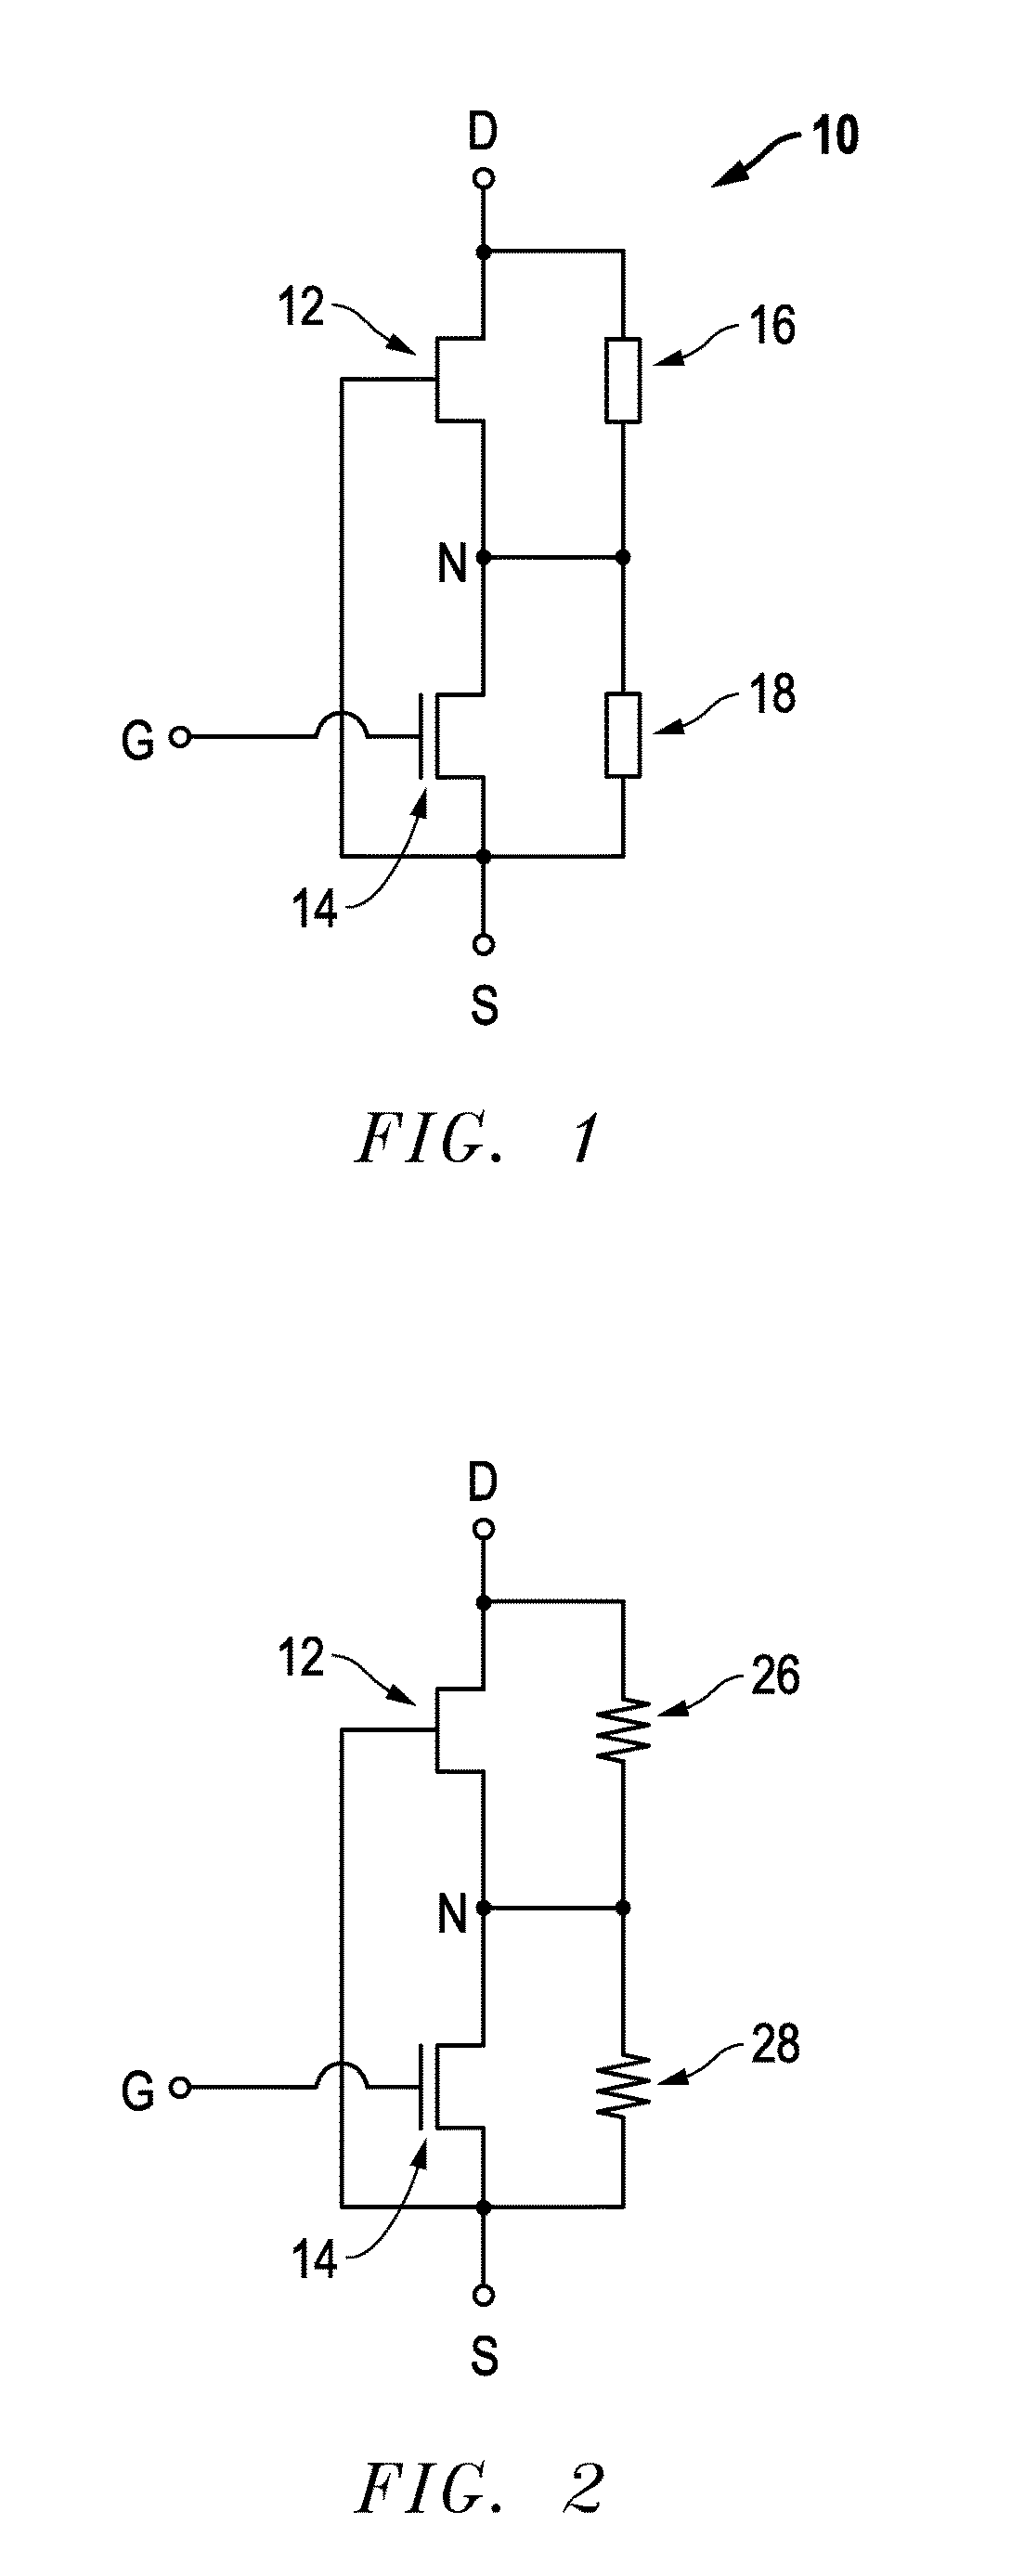 Circuit And An Integrated Circuit Including A Transistor And Another Component Coupled Thereto